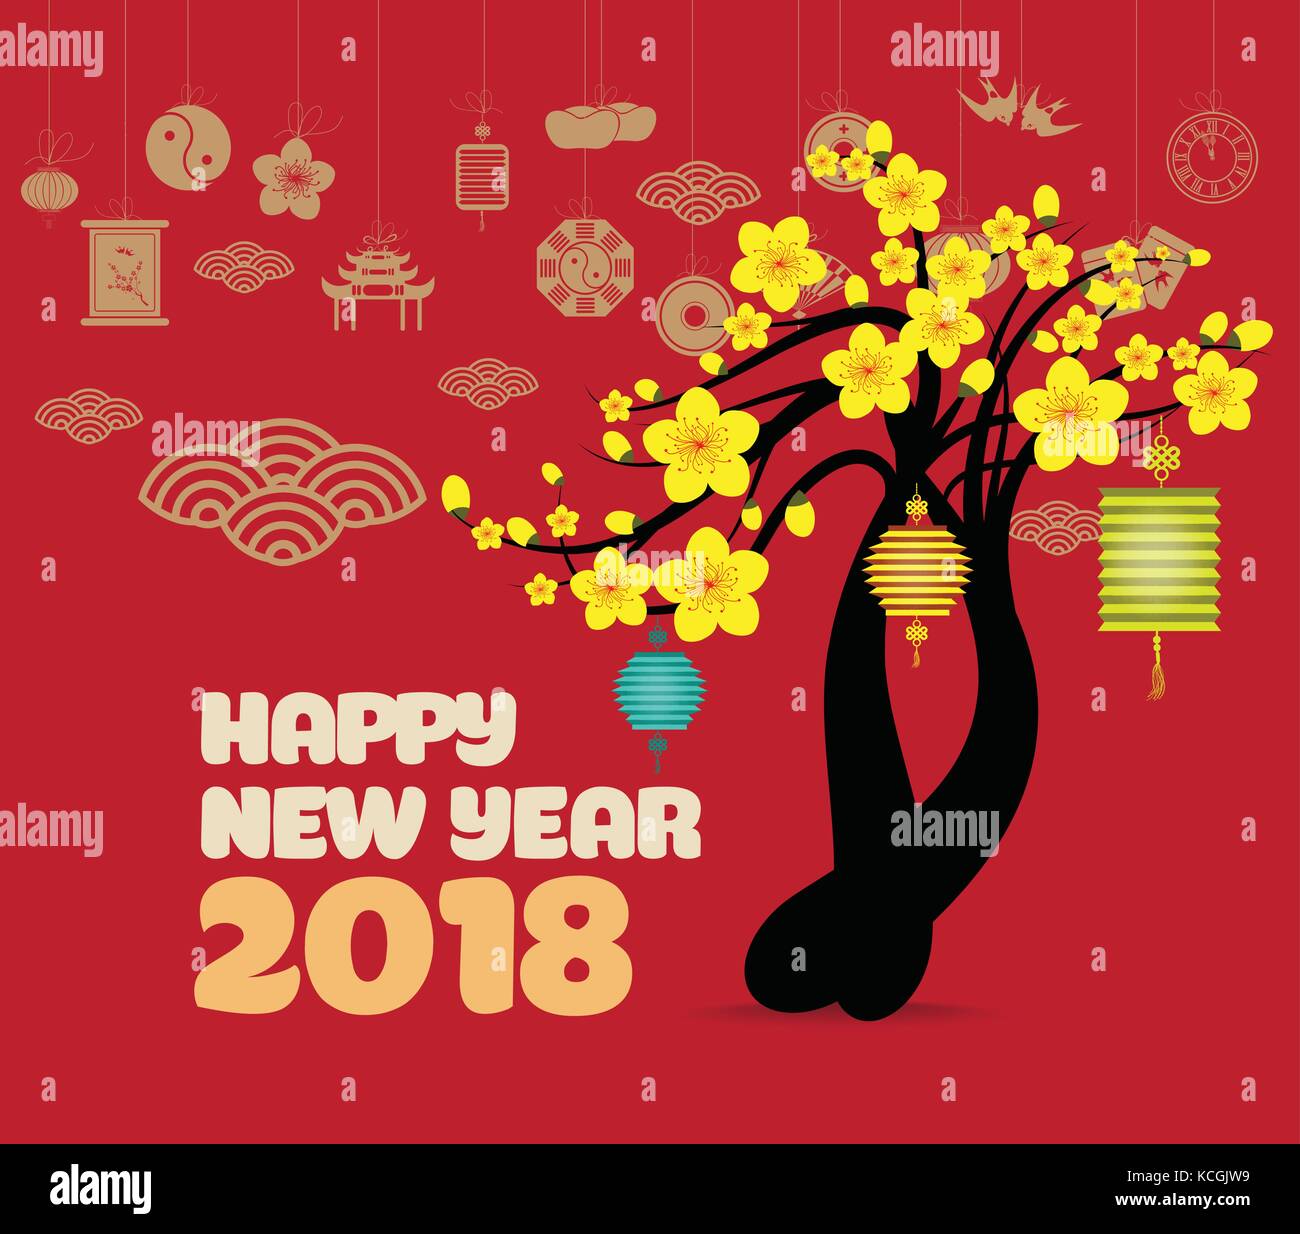 Chinese new year with blossom and icon element Stock Vector